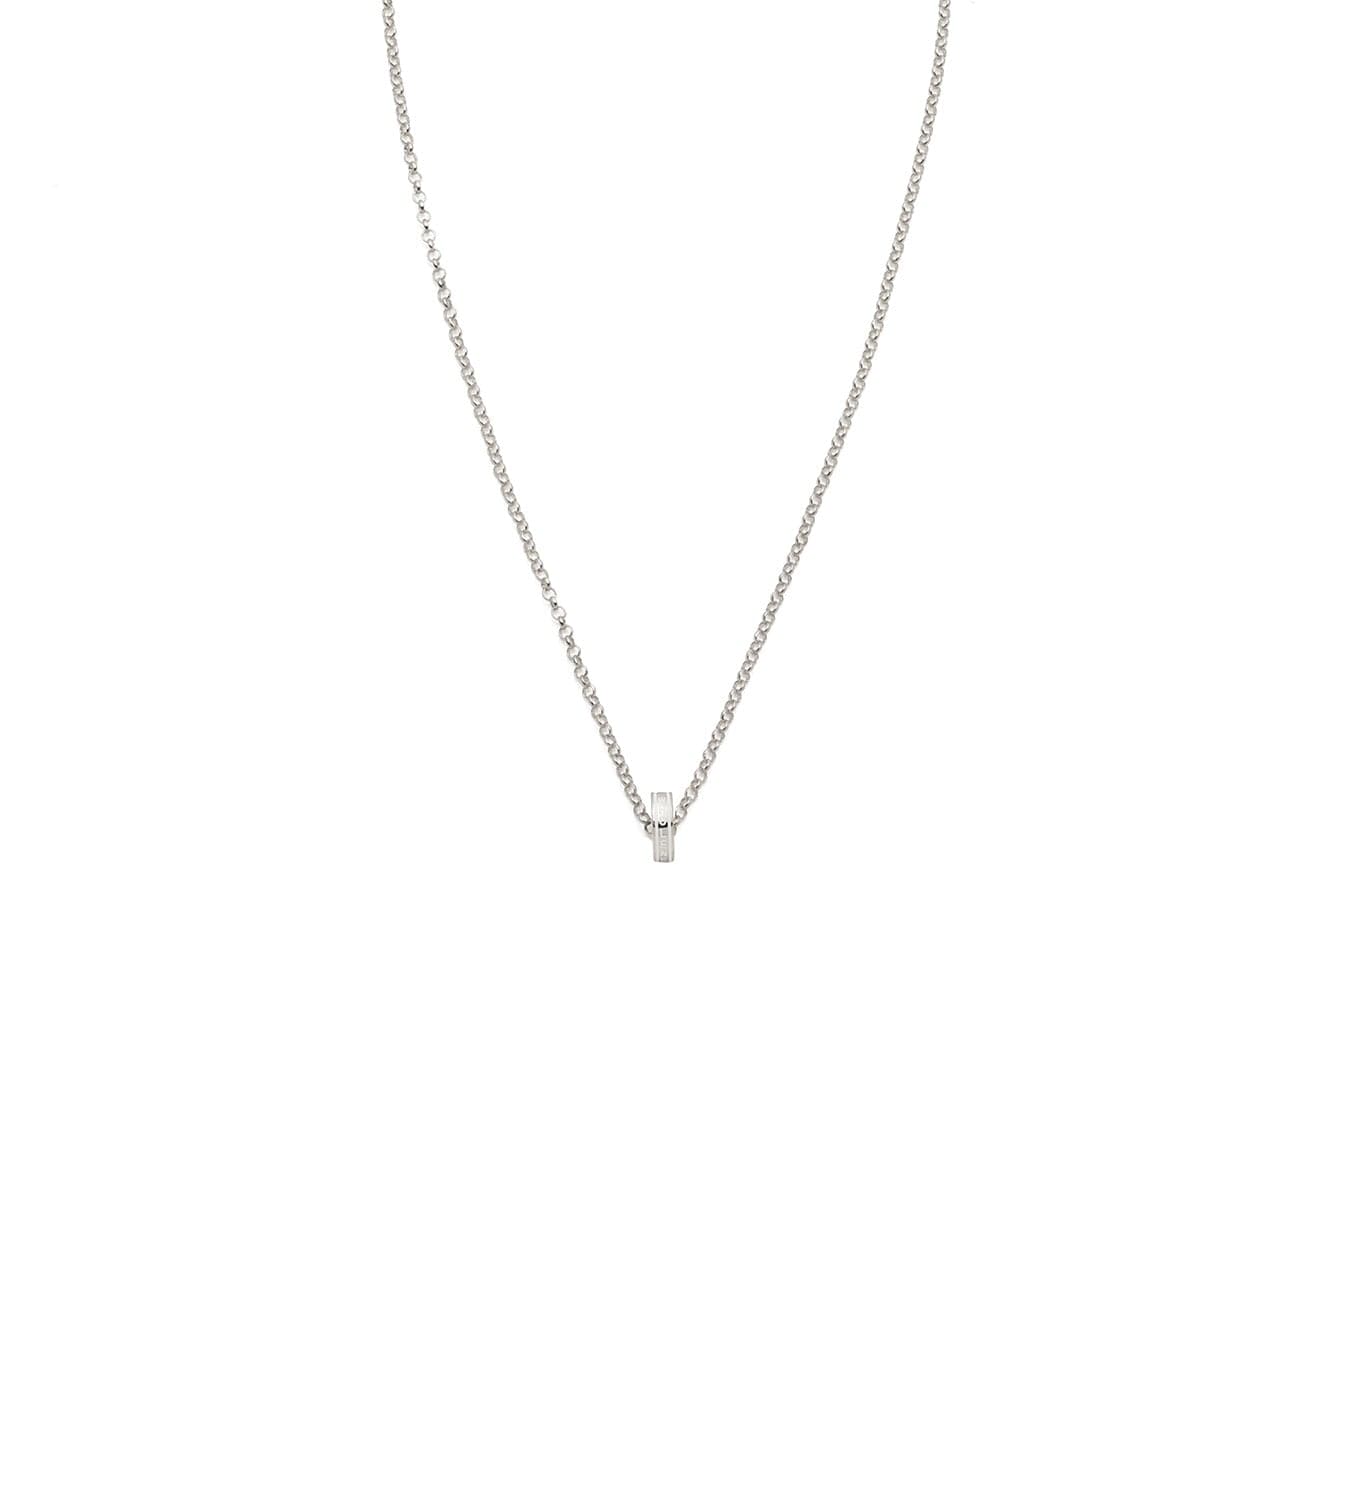 Wholeness : Heart Beat Fine Belcher Chain Necklace White Gold